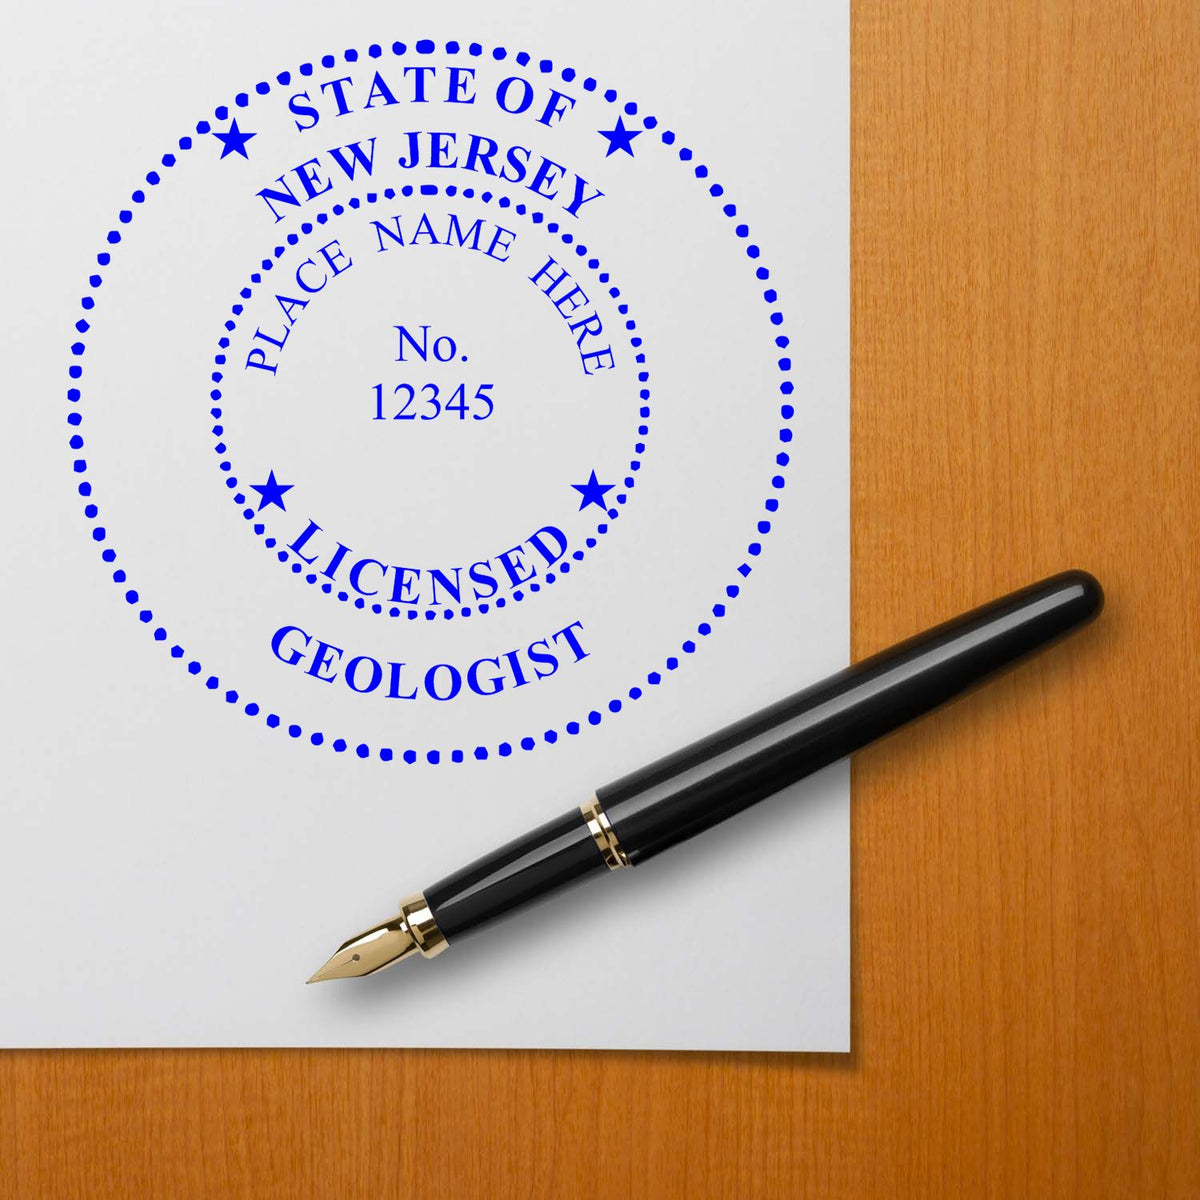 A lifestyle photo showing a stamped image of the Digital New Jersey Geologist Stamp, Electronic Seal for New Jersey Geologist on a piece of paper